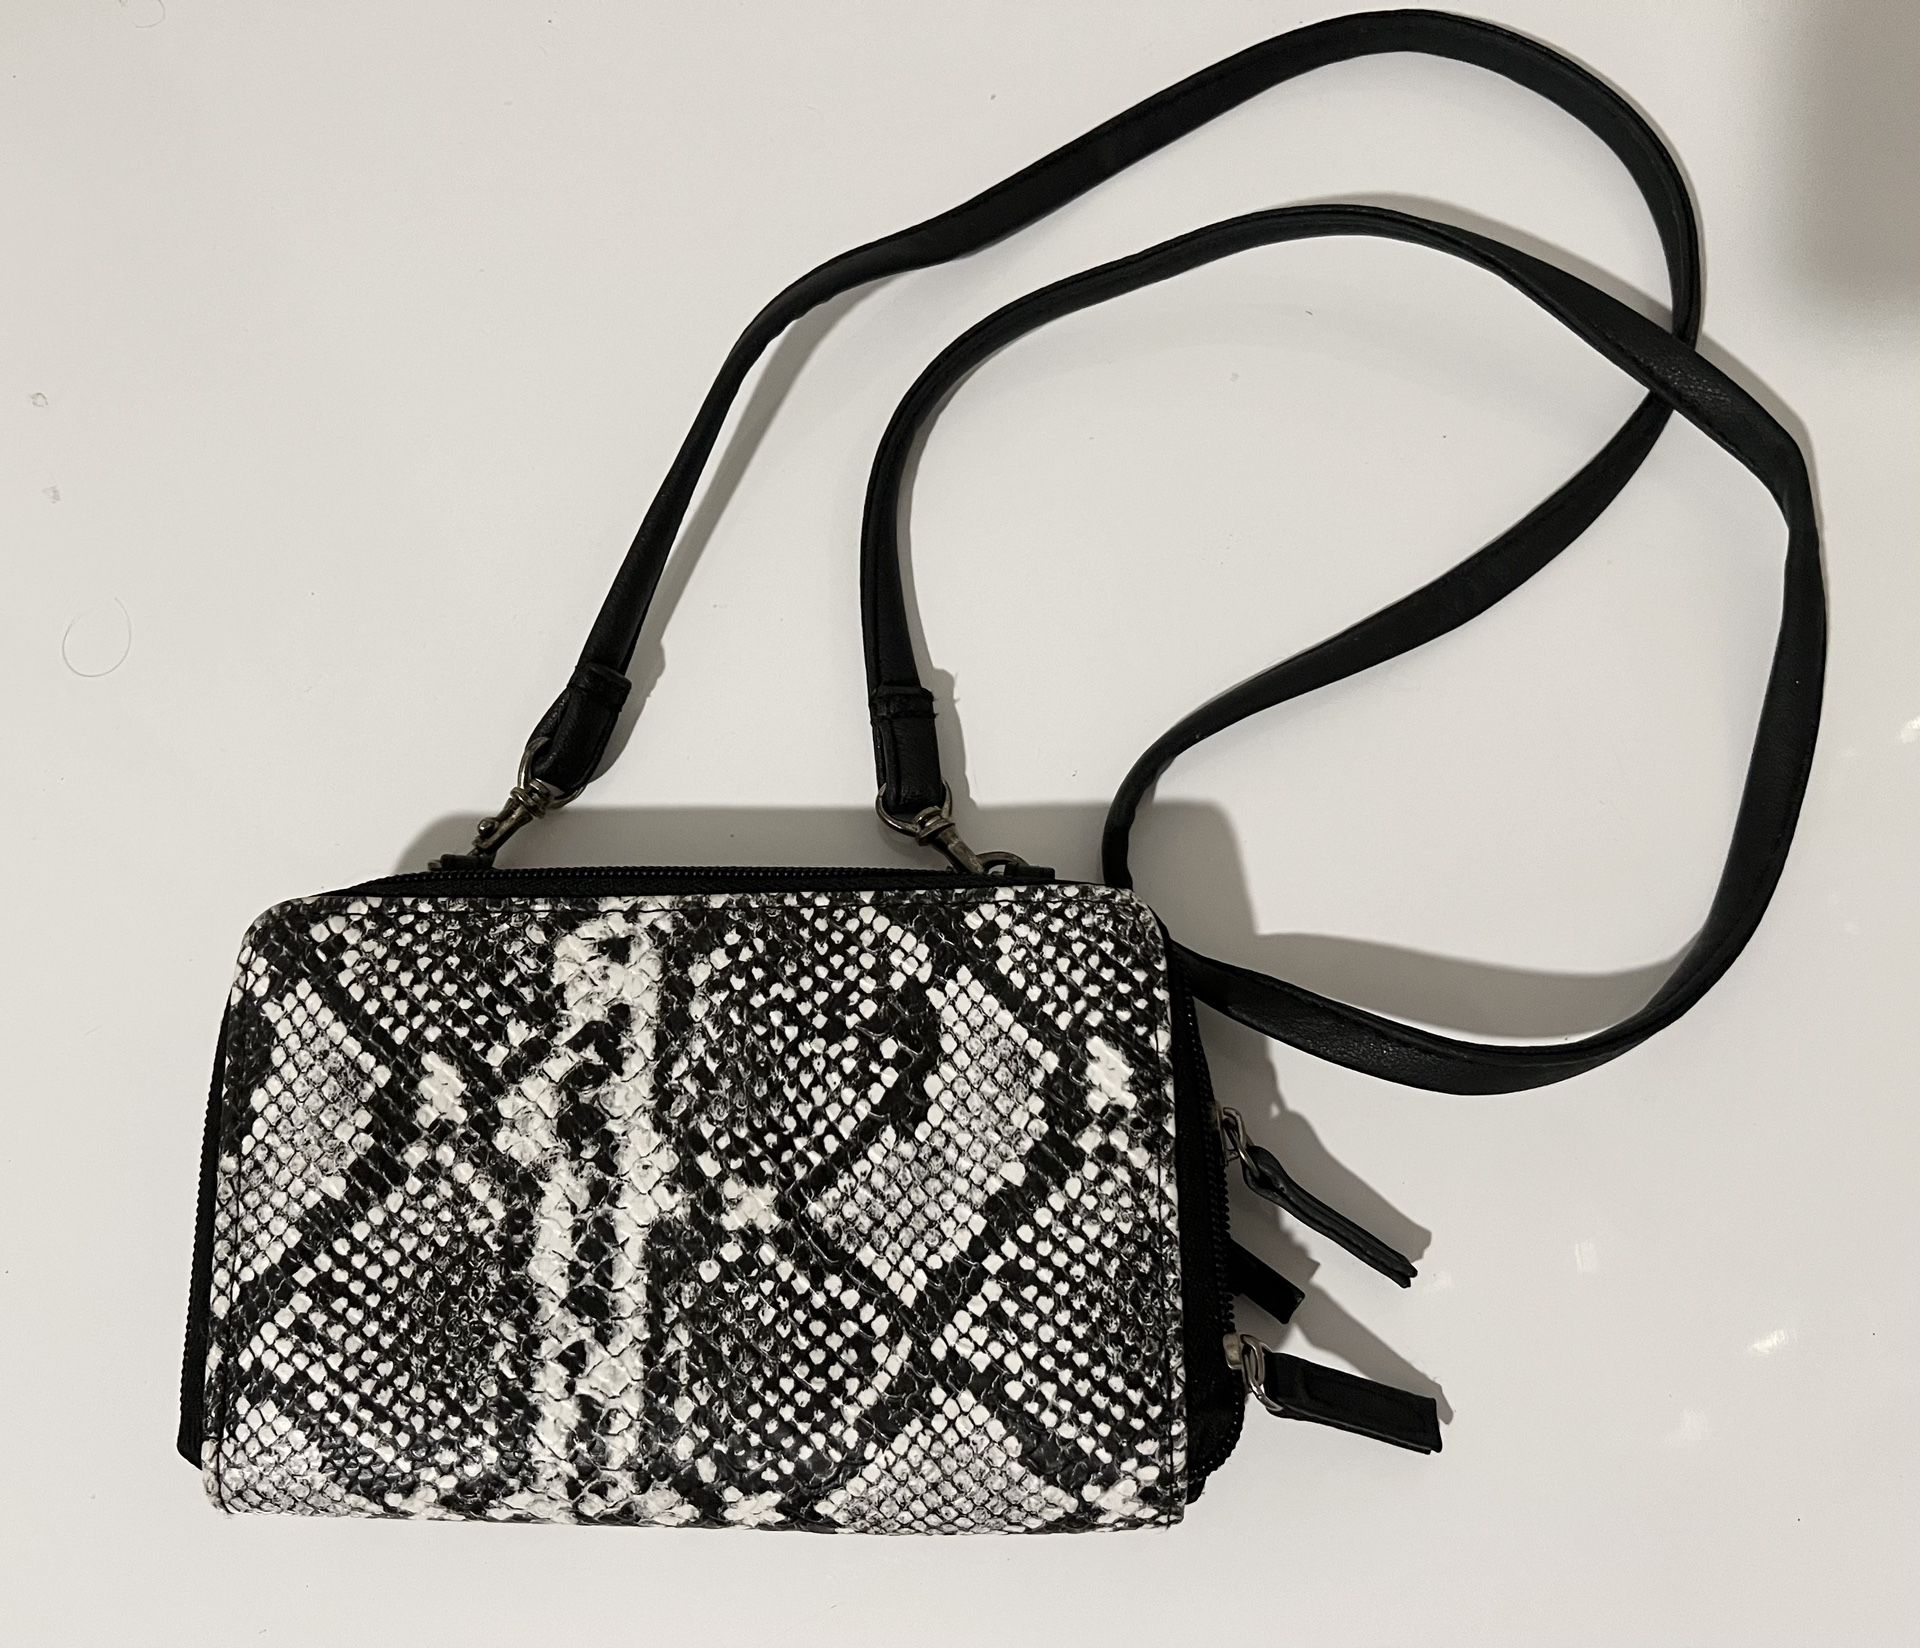 Pouch Wallet With Strap Crossbody Bag Snake Print Black and White 7x5”